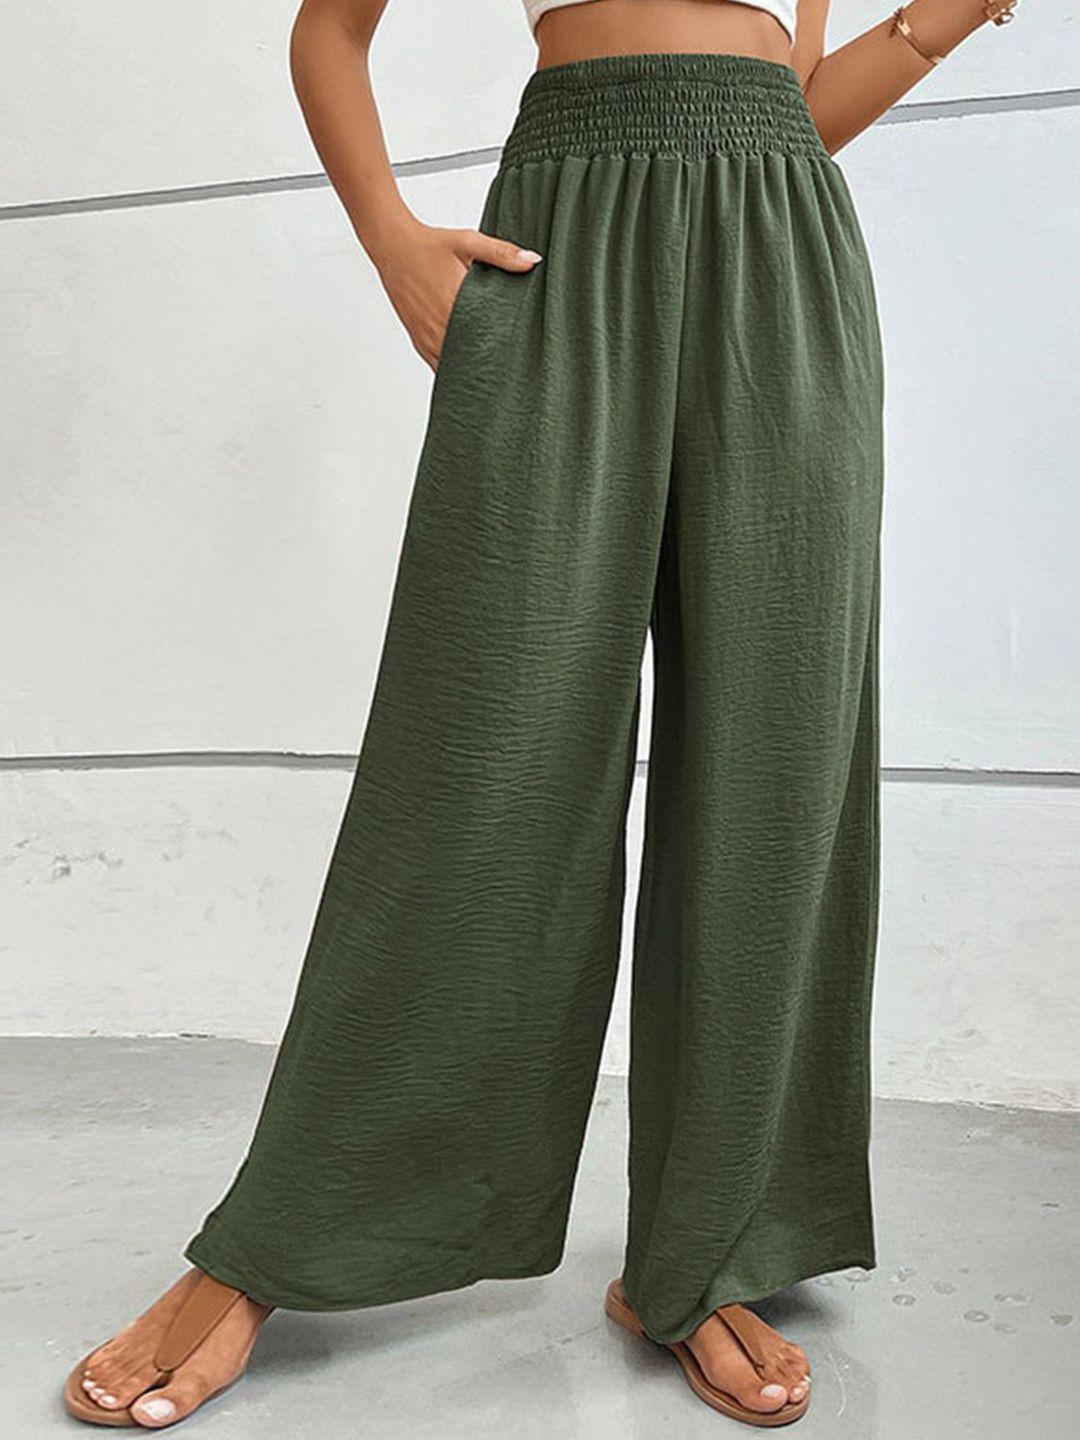 stylecast women green flared high-rise parallel trousers